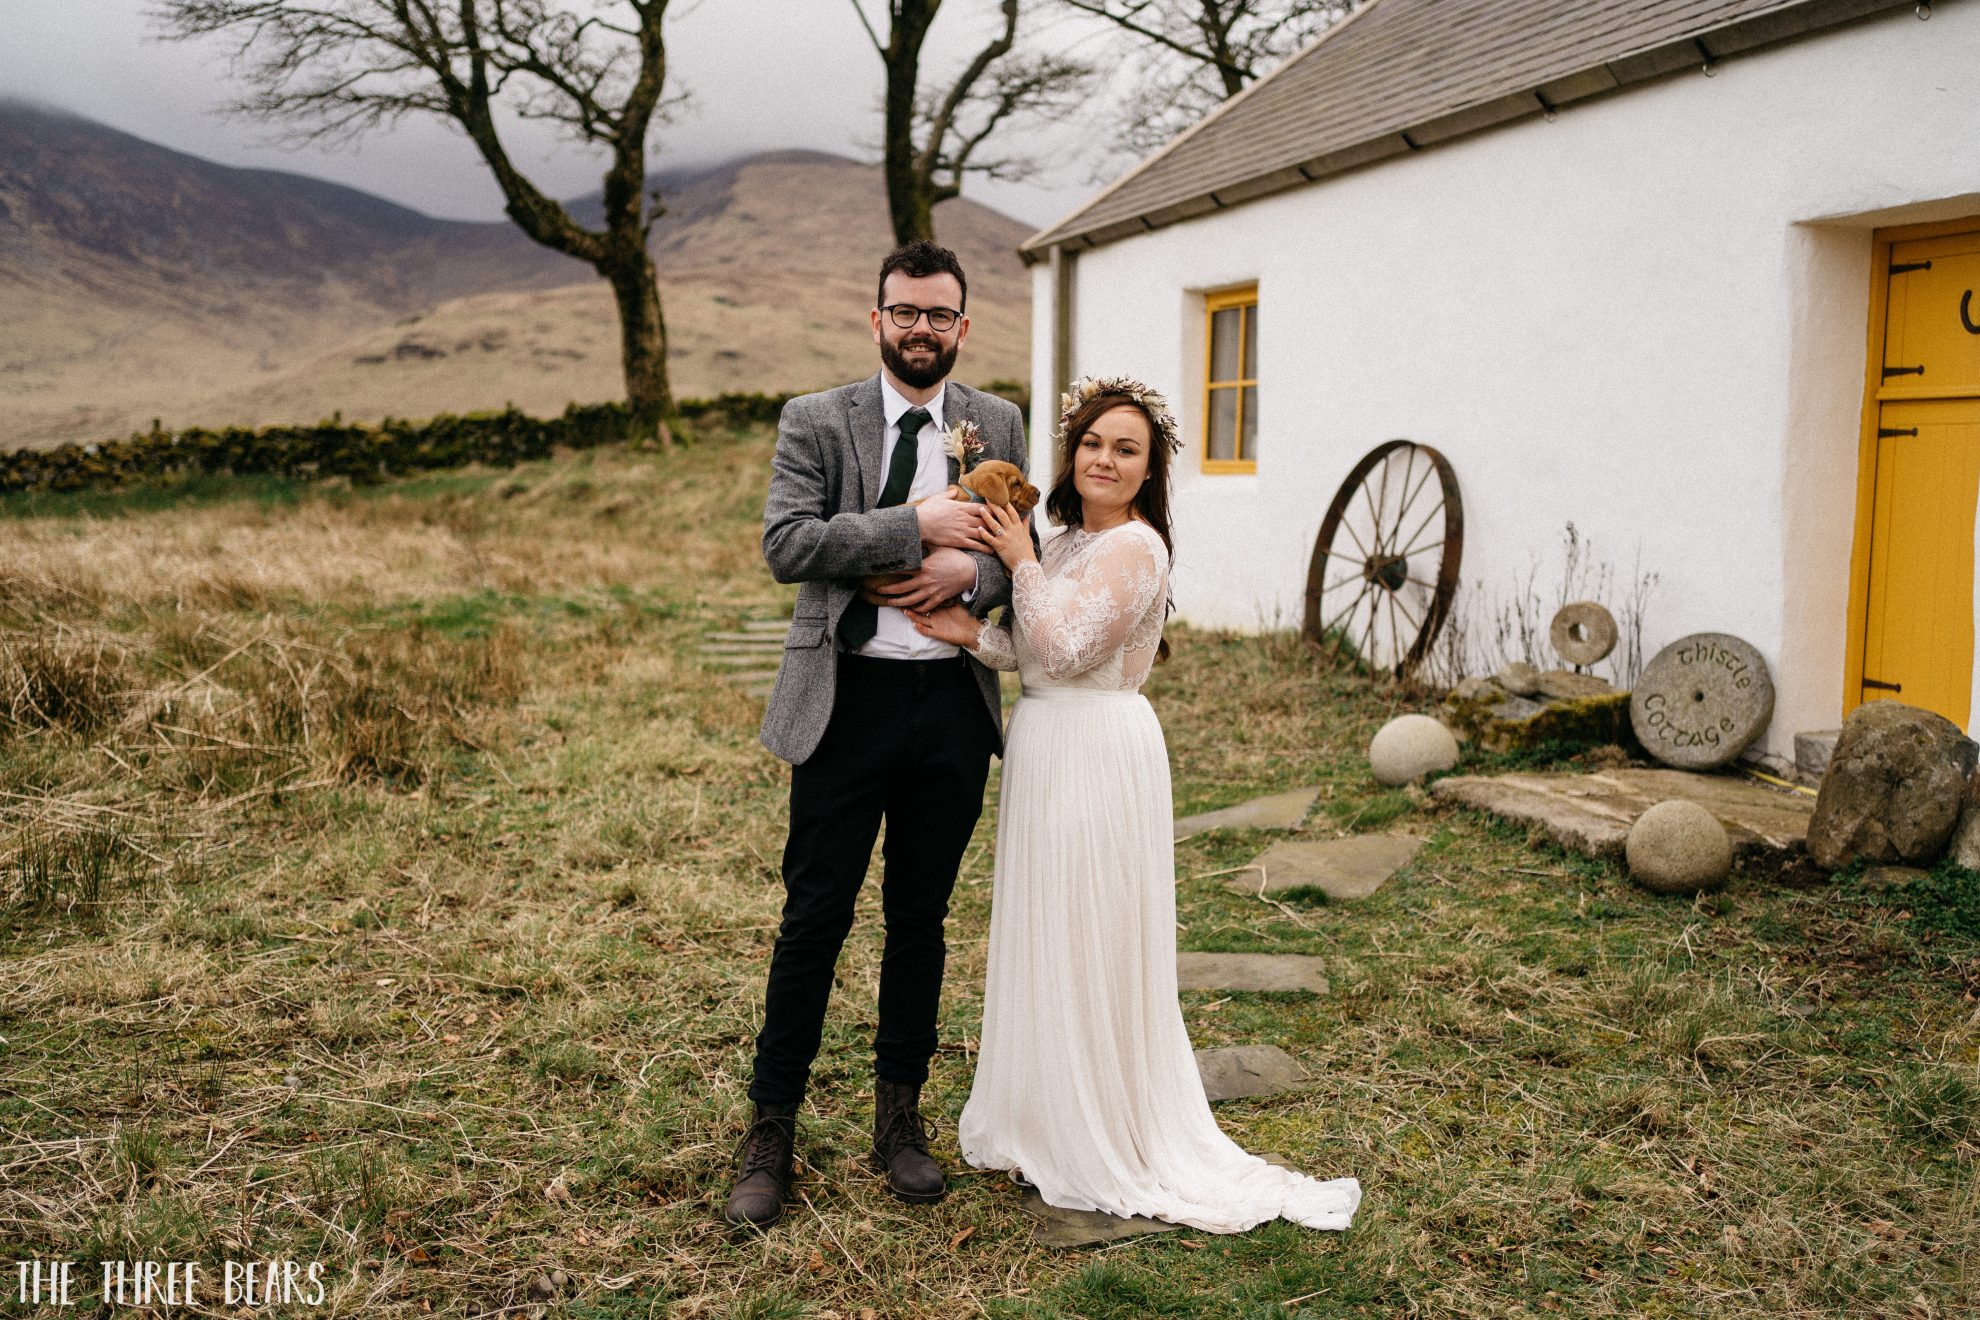 https://www.weddingjournalonline.com/wp-content/uploads/2021/05/Mourne-Mountains-Wedding-Photography-Photos-By-The-Three-Bears-Photography-0156-1-1-1980x1320.jpg